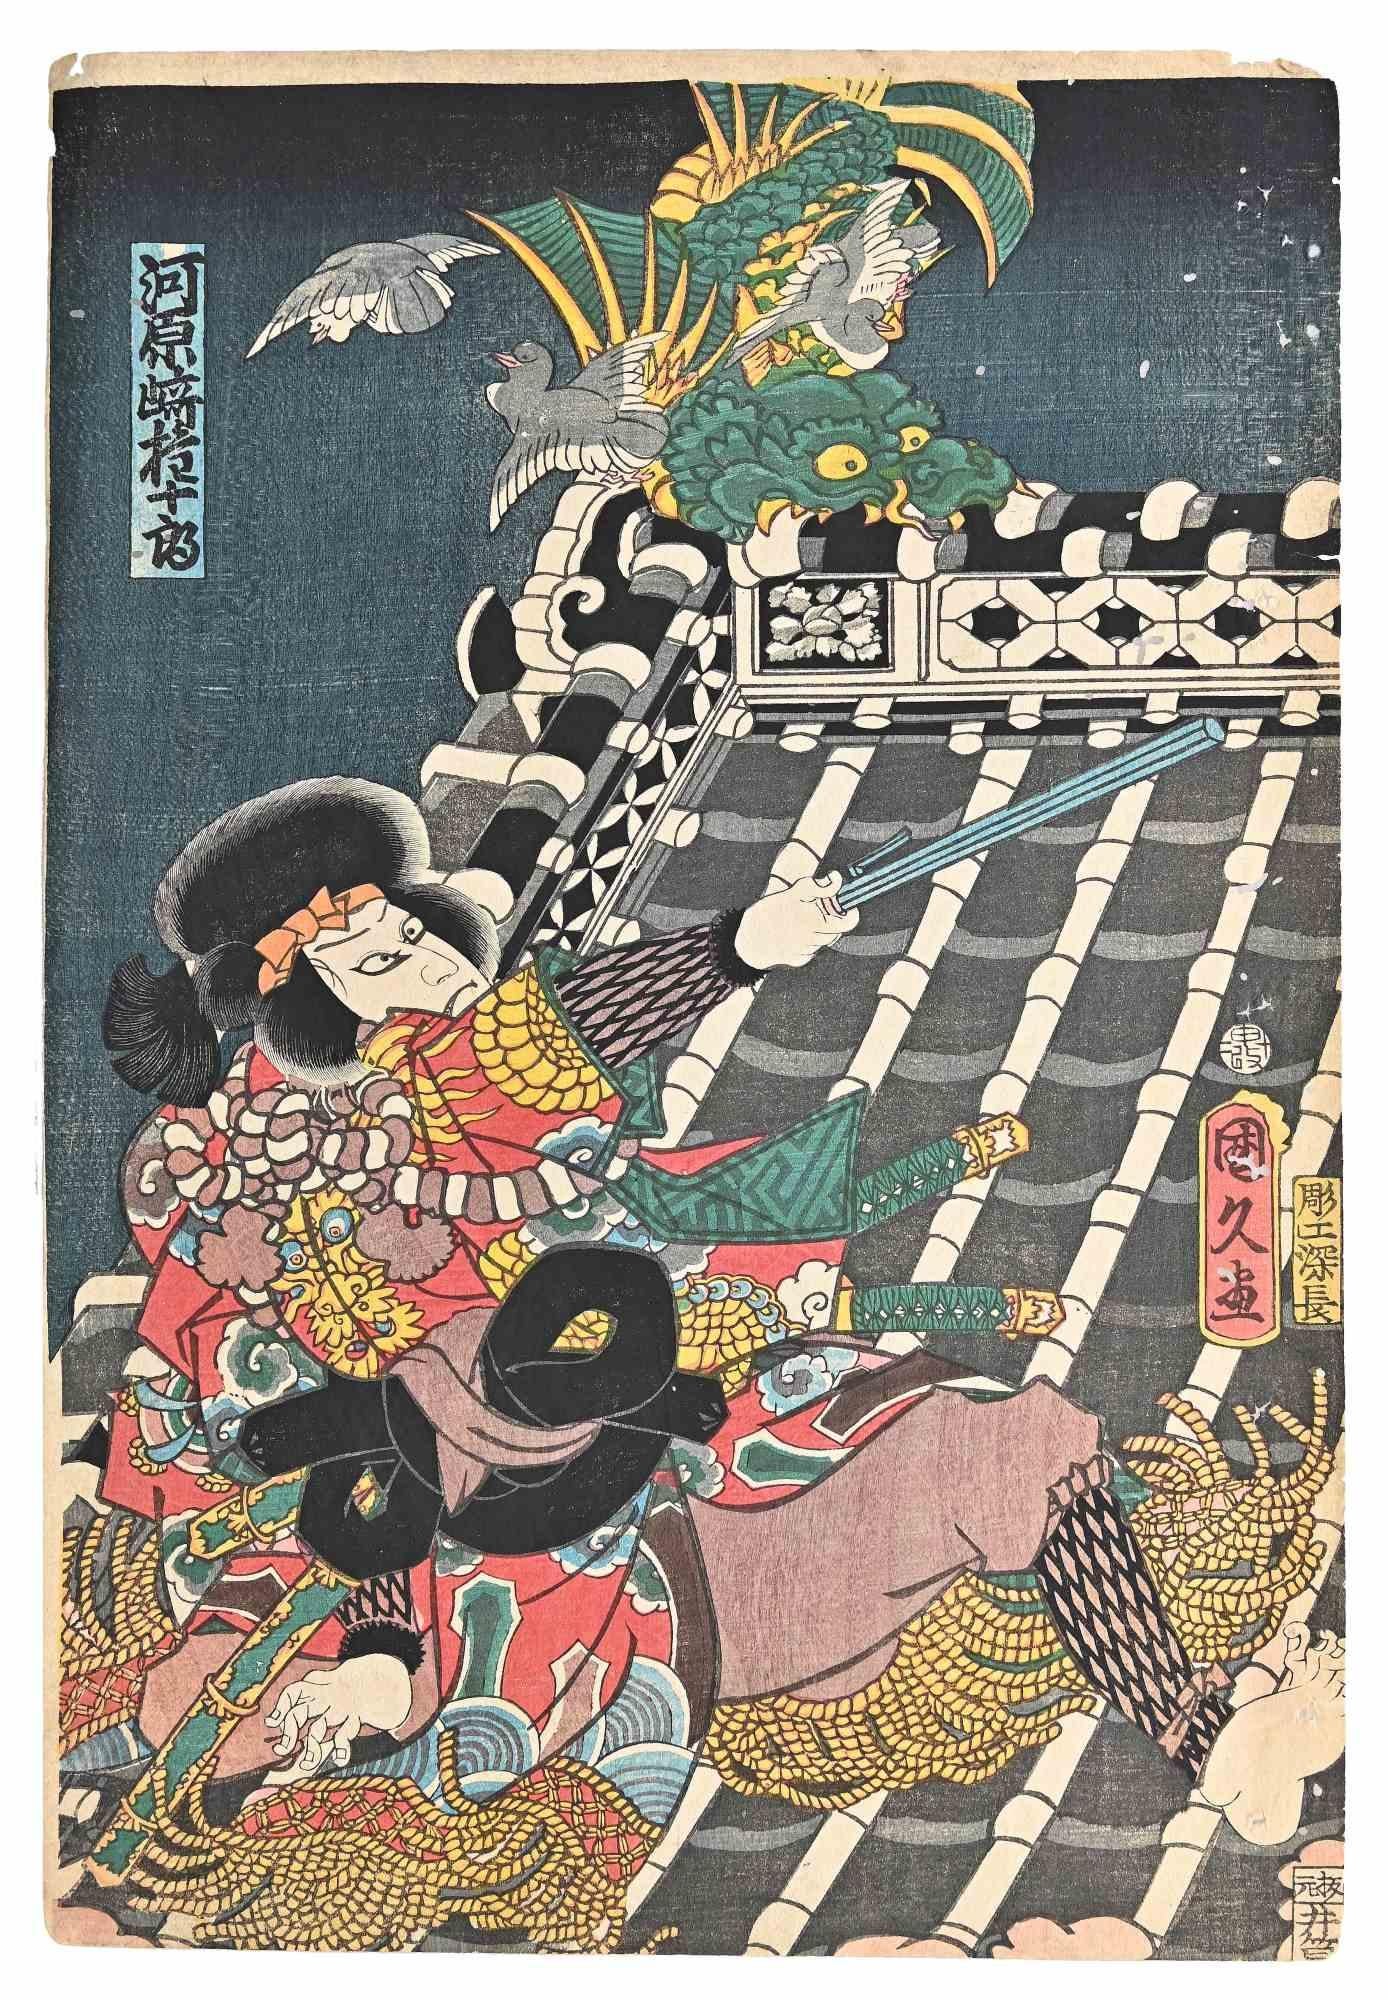 Unknown Landscape Print - Japanese Warrior - Woodblock Print - Mid-19th Cent.